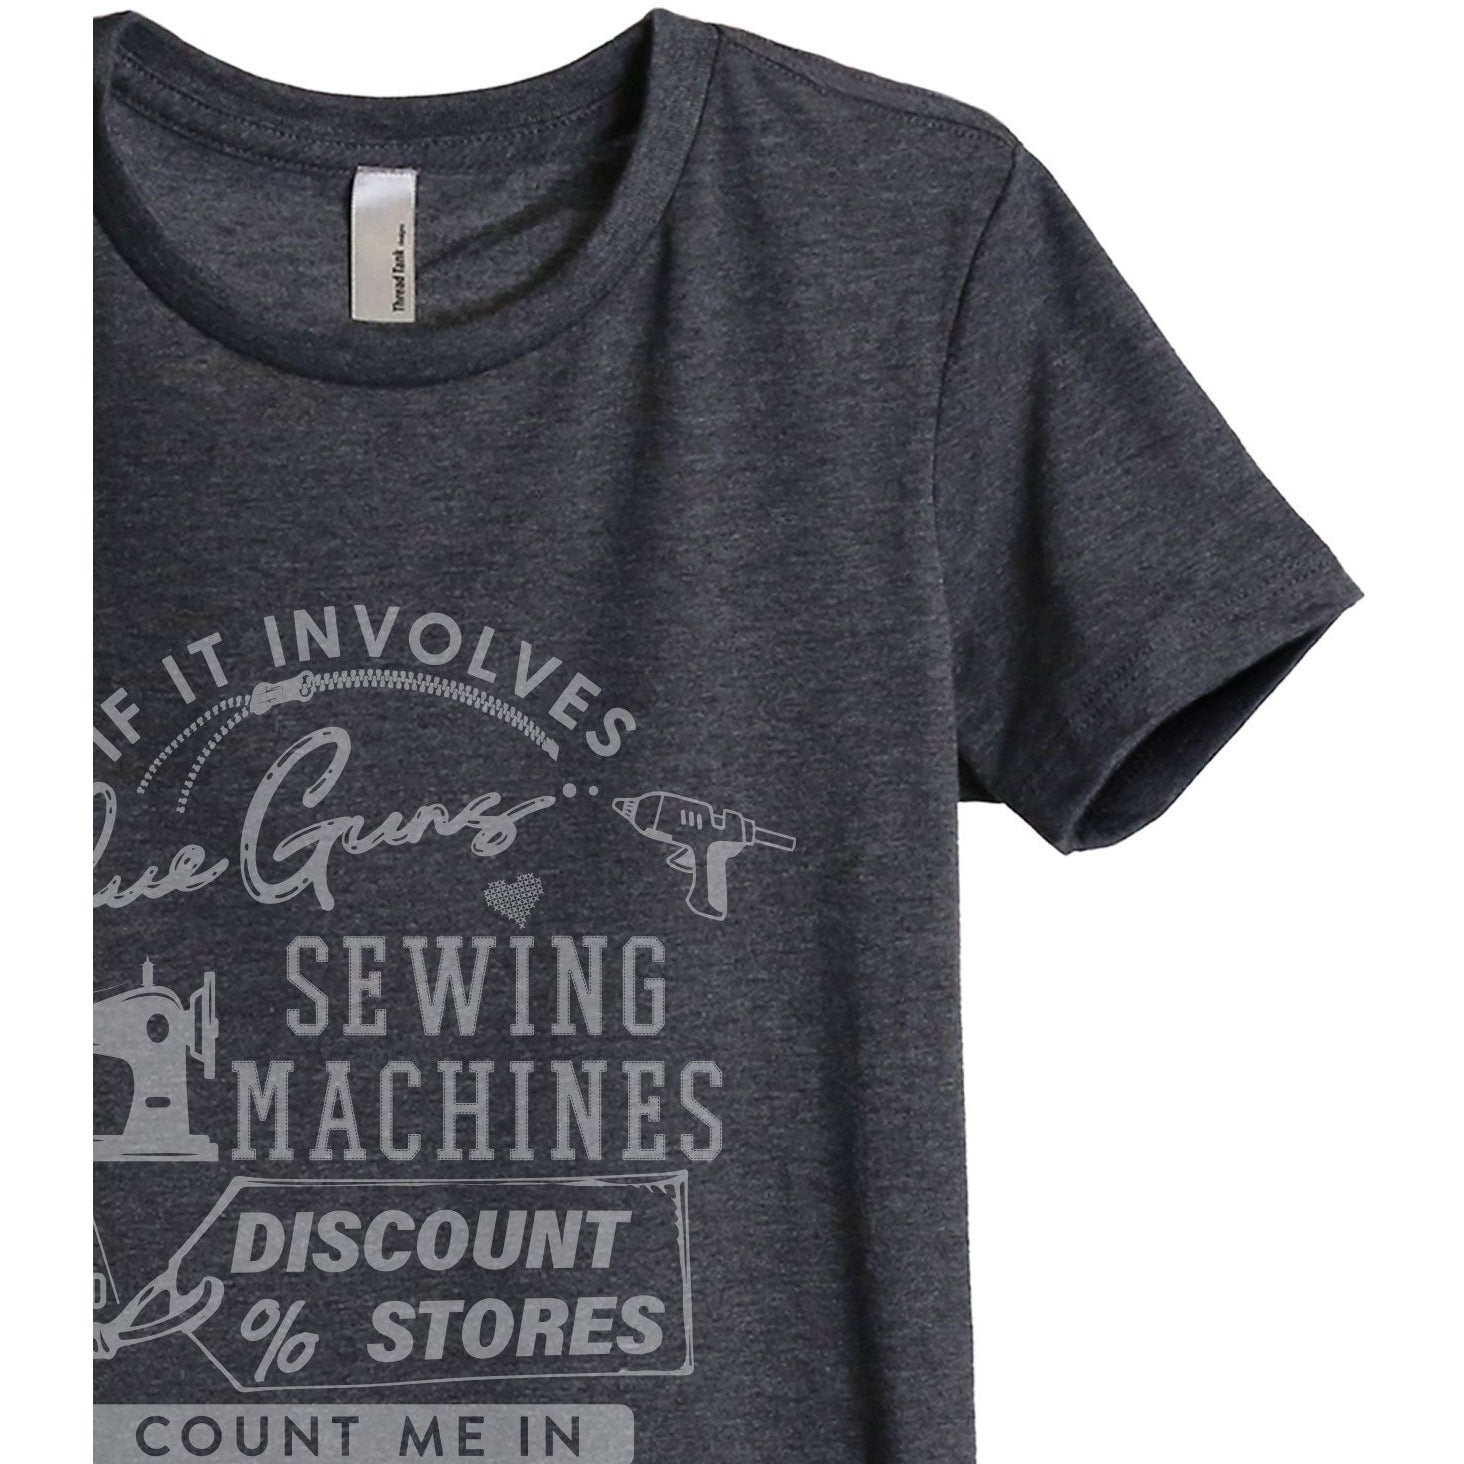 Glue Guns Sewing Machines And Discount Stores Women's Relaxed Crewneck T-Shirt Top Tee Charcoal Grey Zoom Details